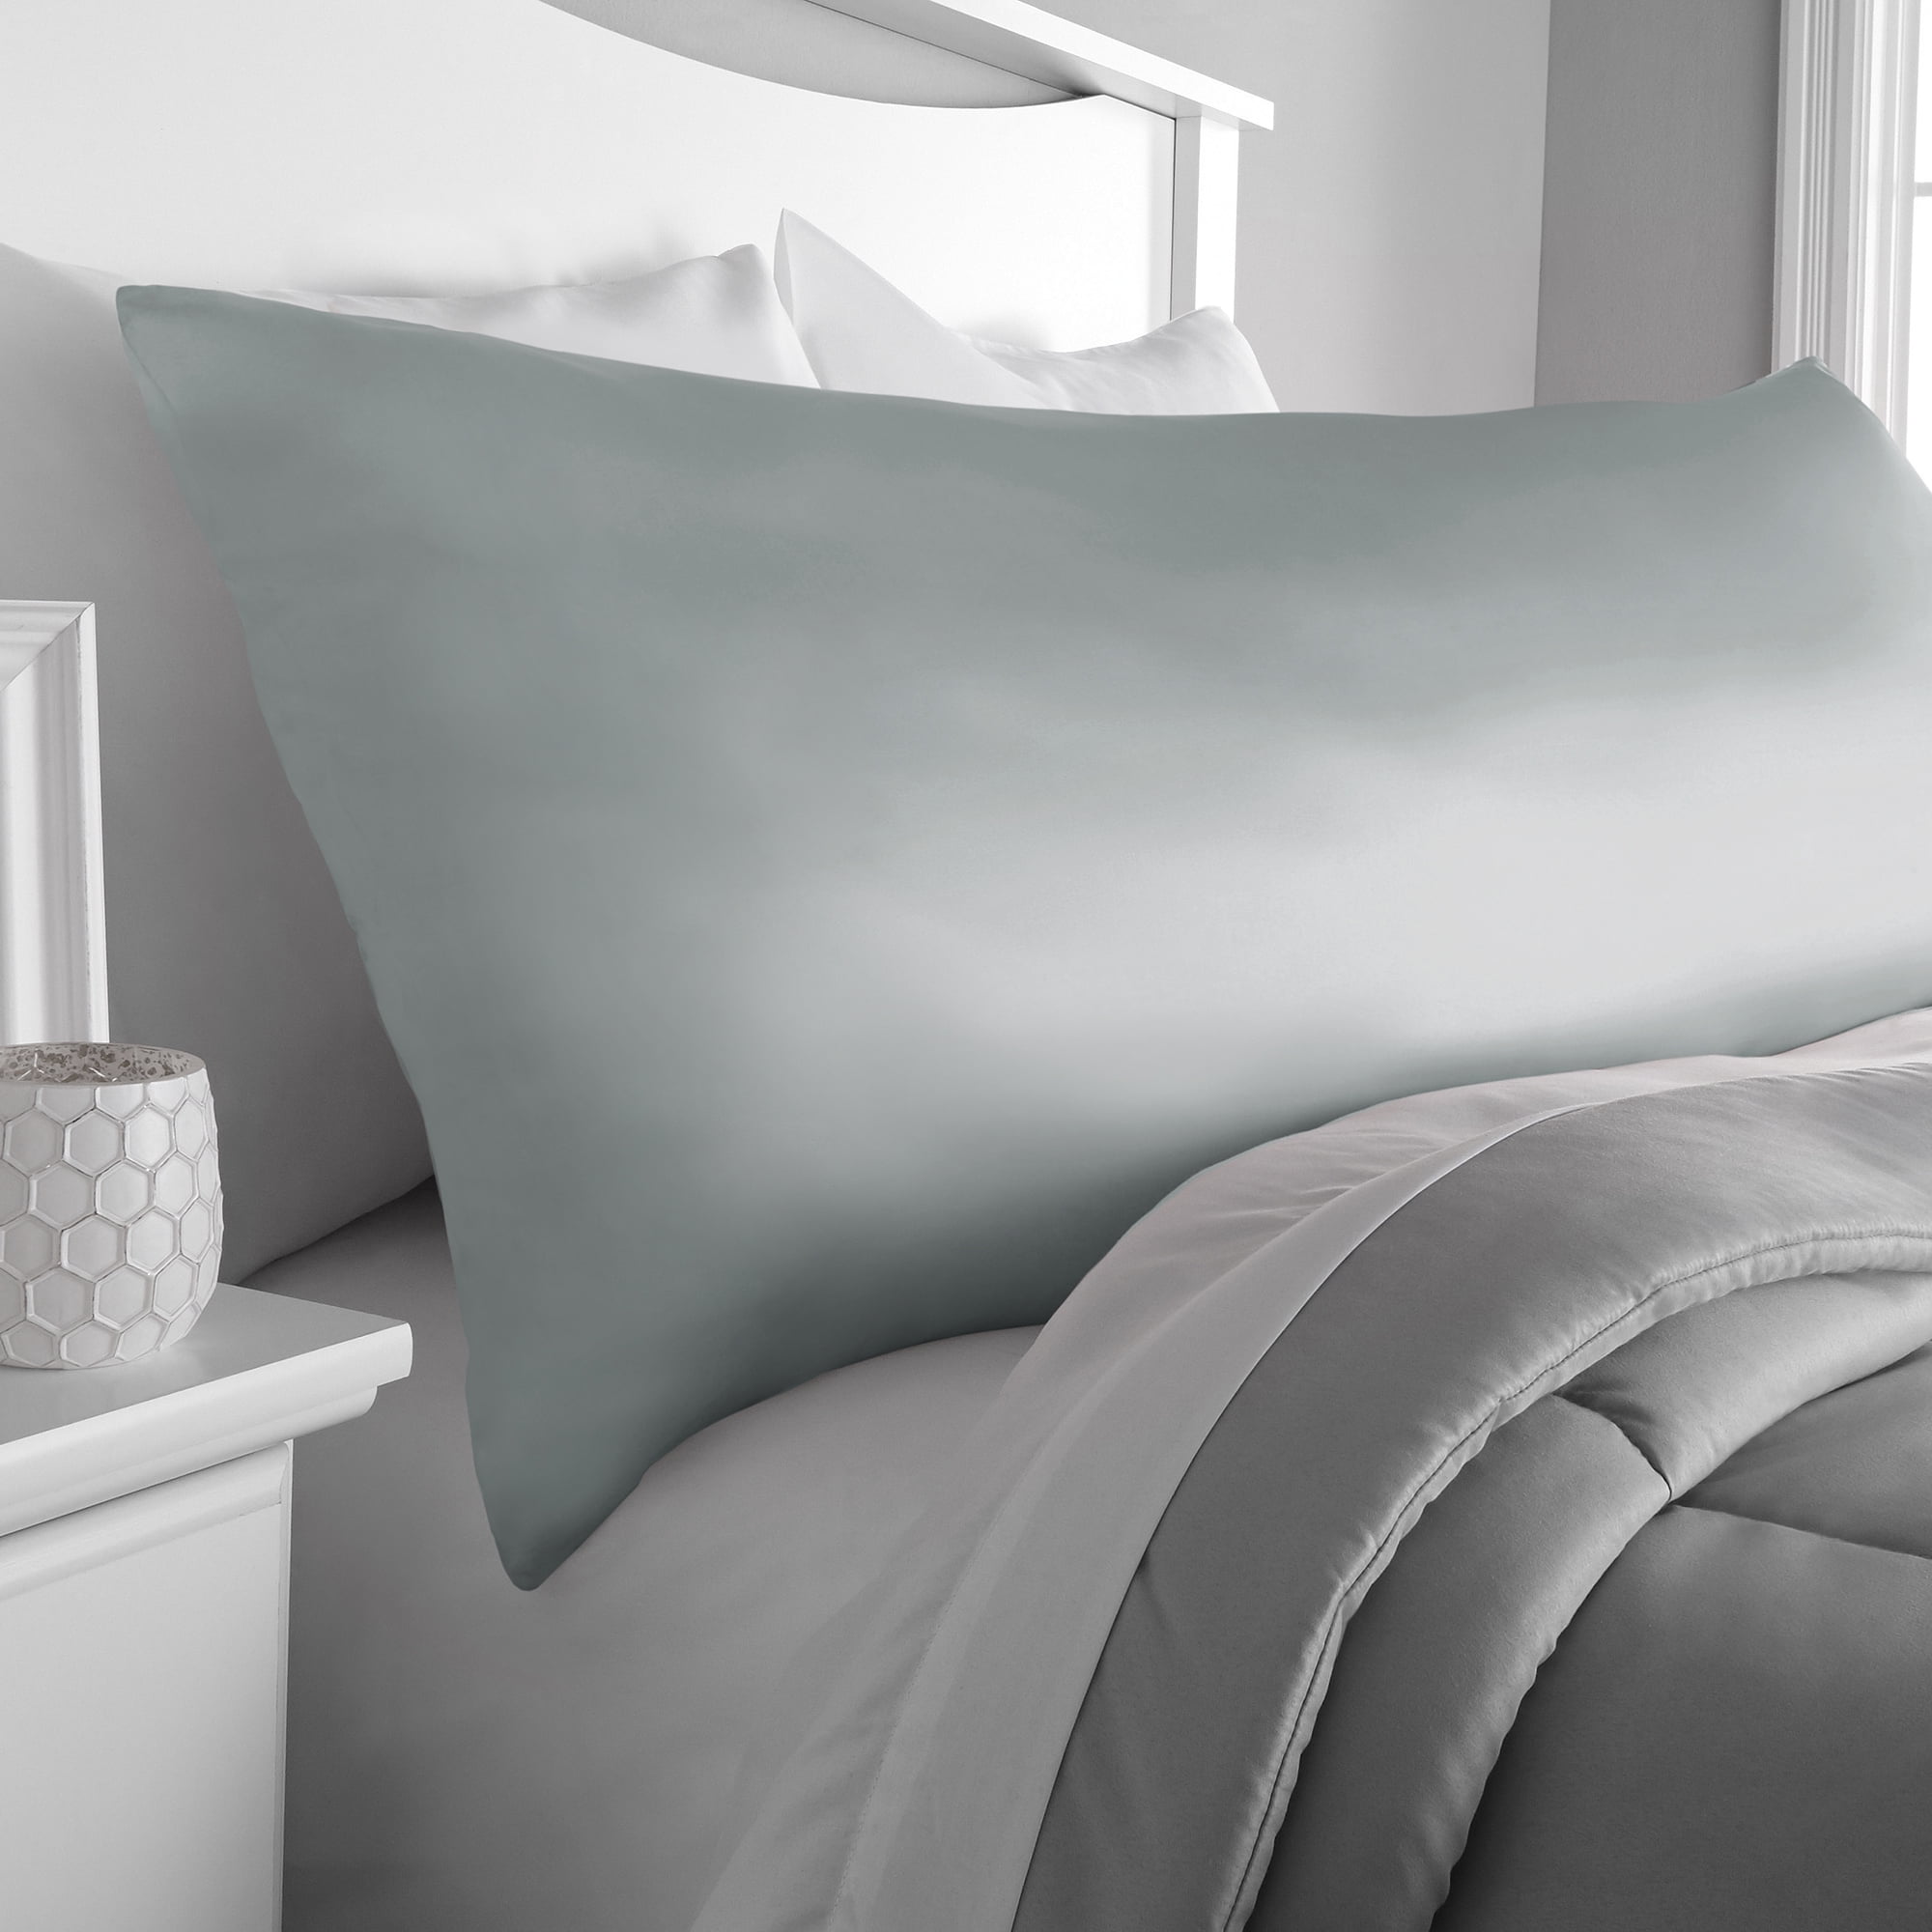 Mainstays Woven Solid Satin Body Pillow Cover, Zipper Closure, 20"x52", Grey